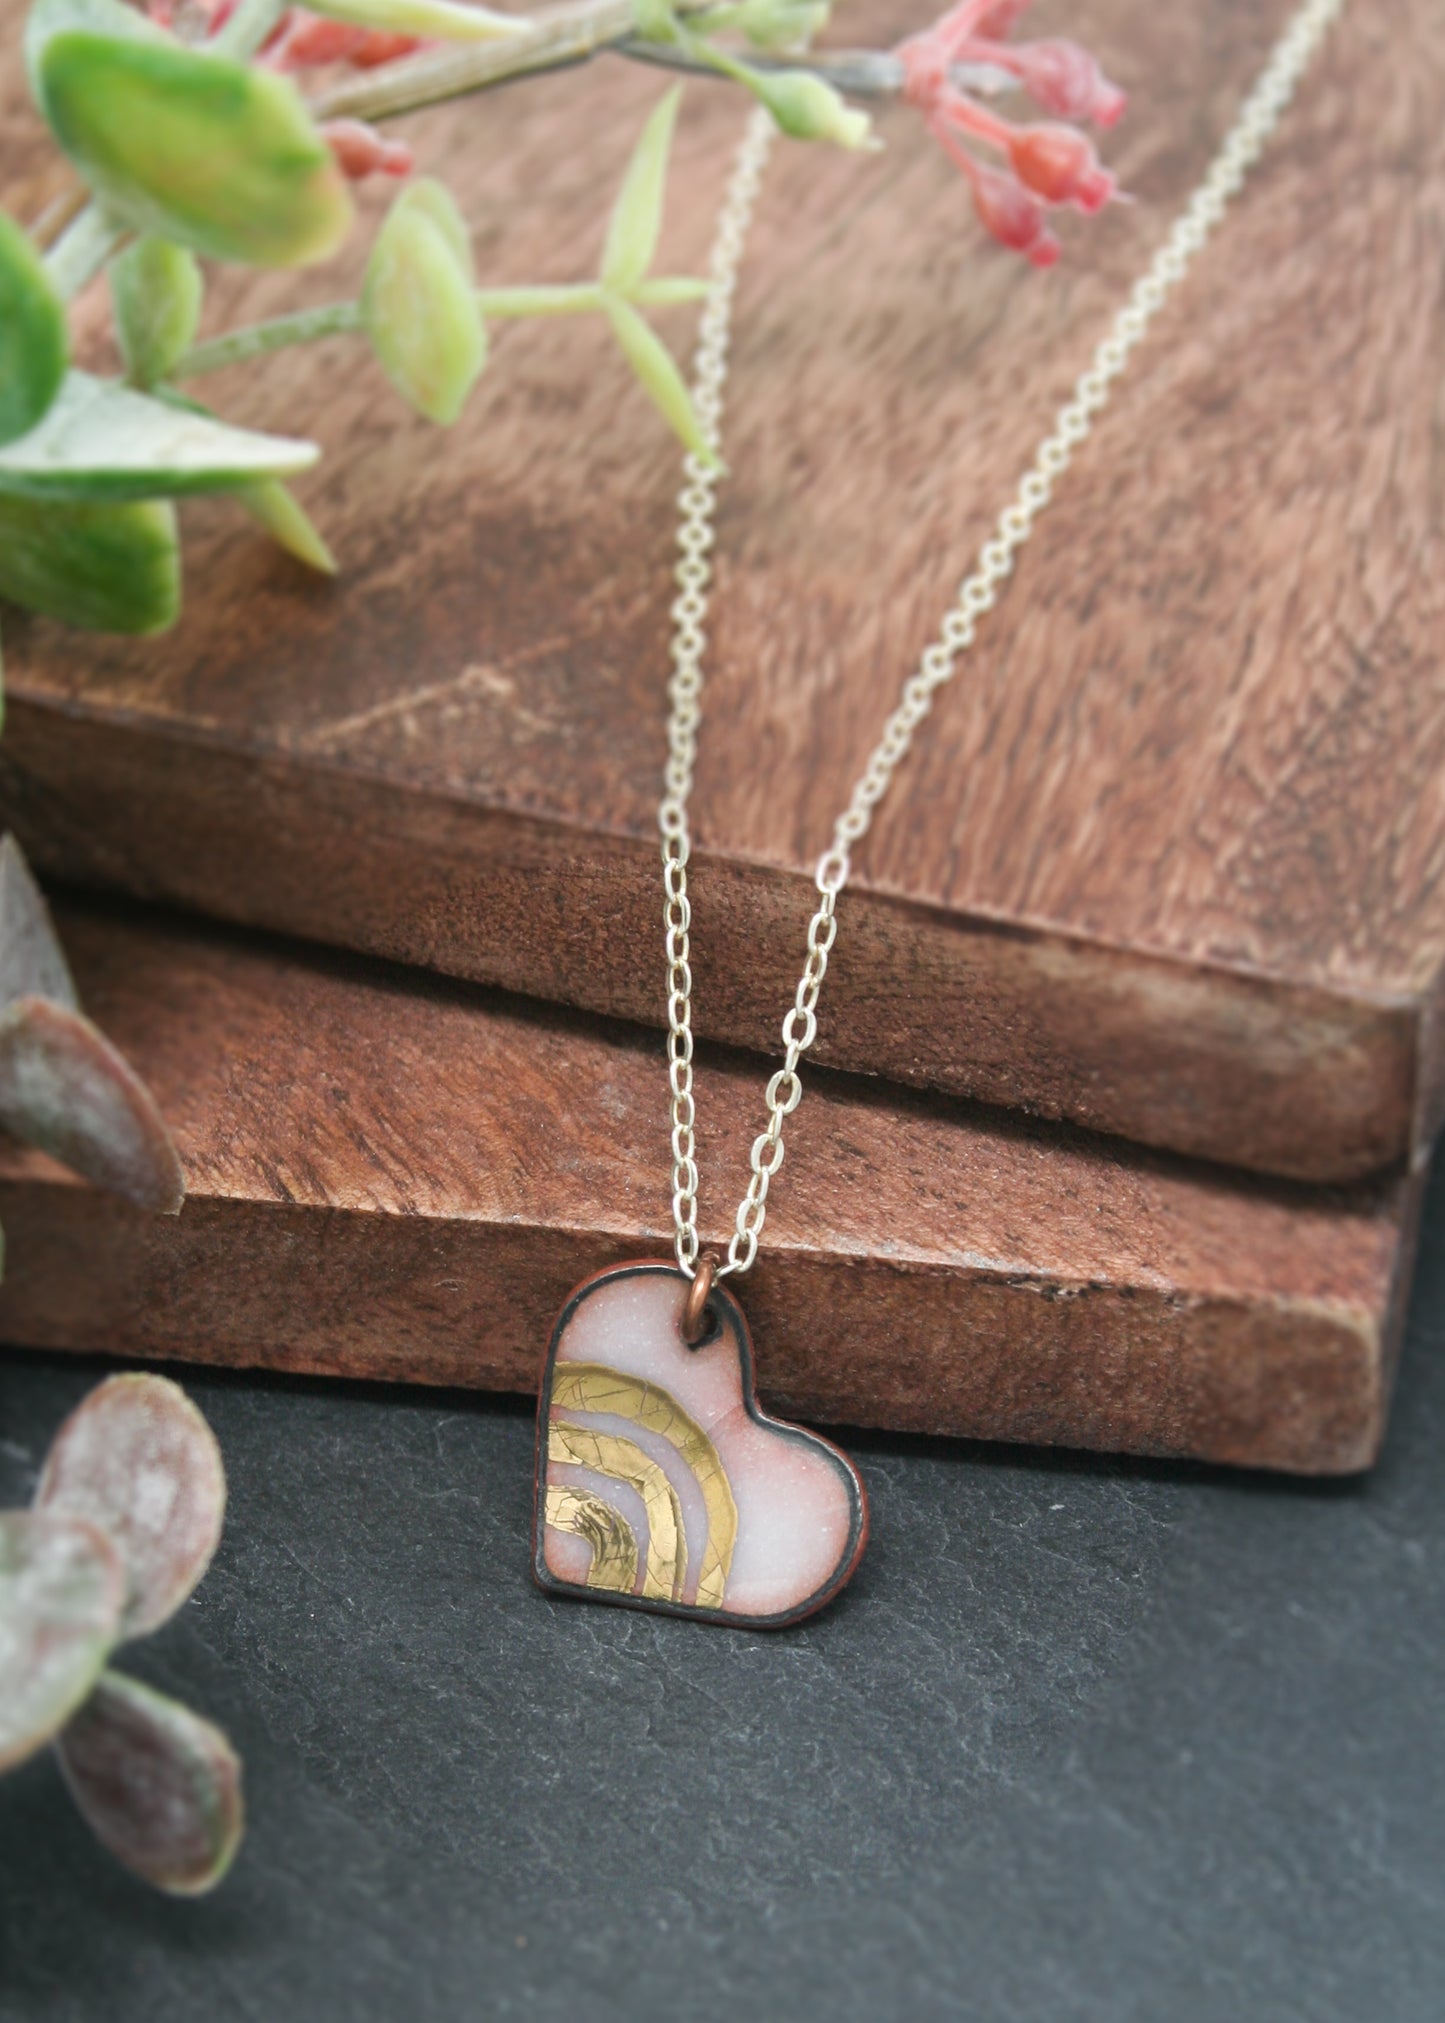 a heart shaped pendant on a wooden surface